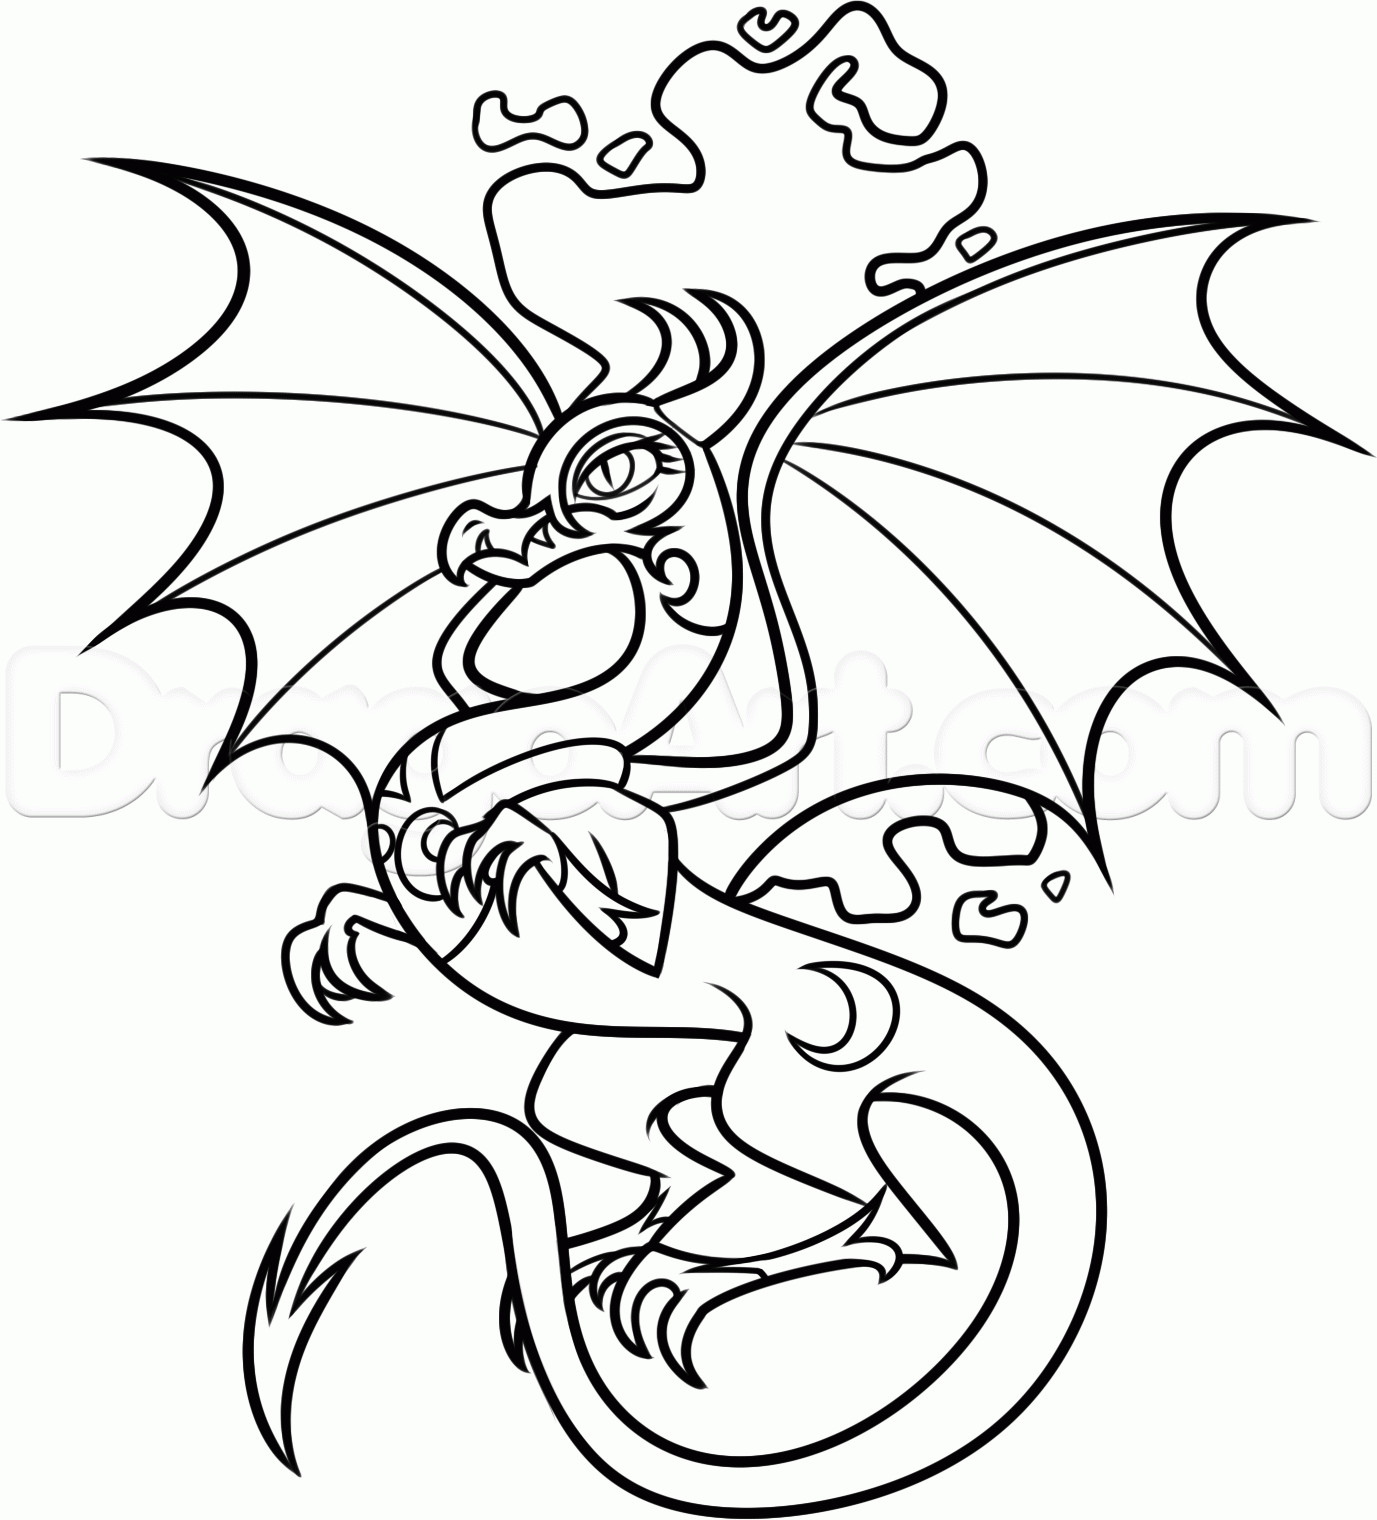 Nightmare Moon Coloring Pages
 Nightmare Moon Free Coloring Pages